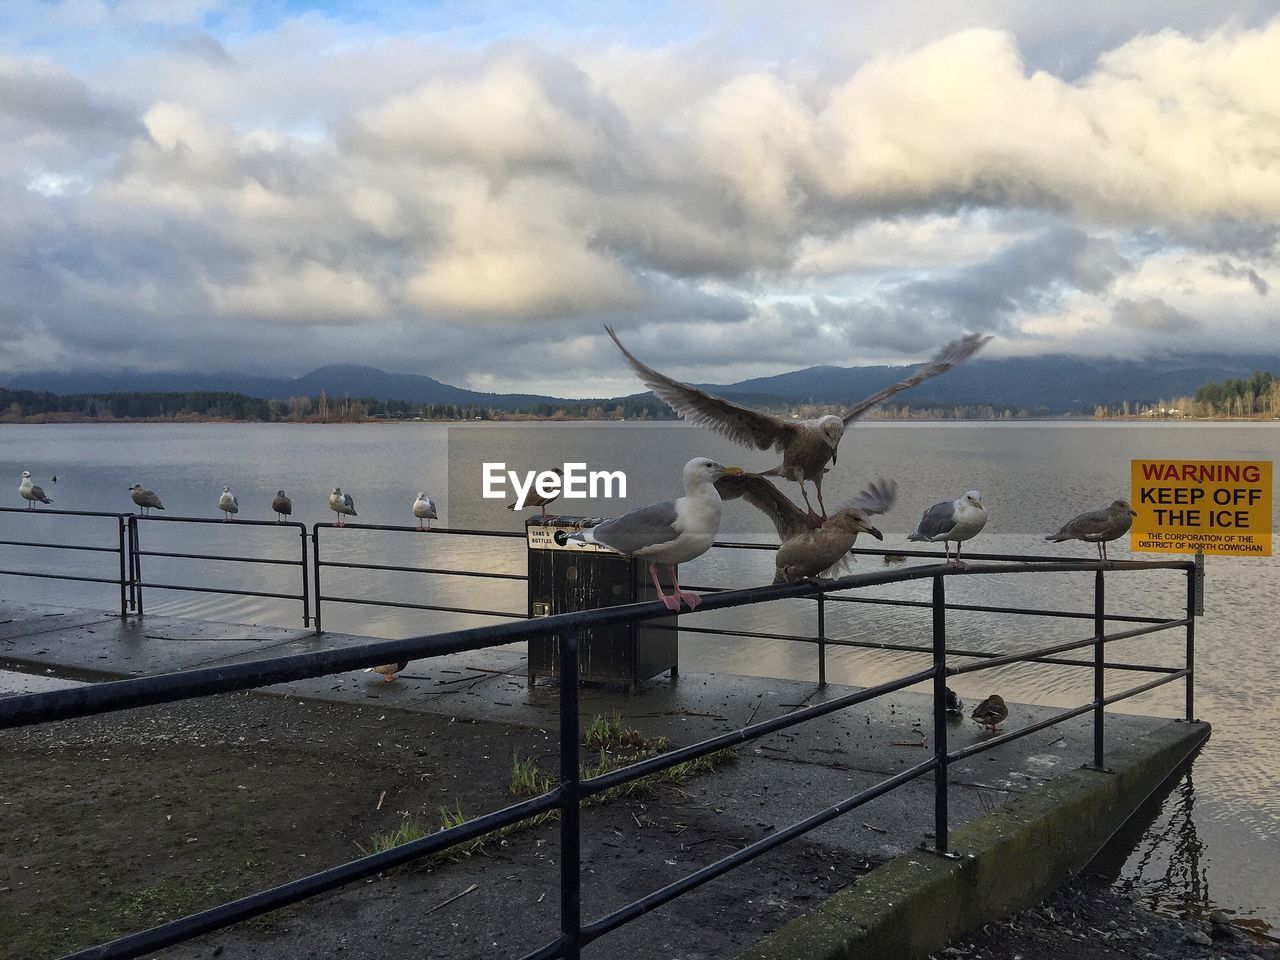 Seagulls perching on railing by lake against cloudy sky